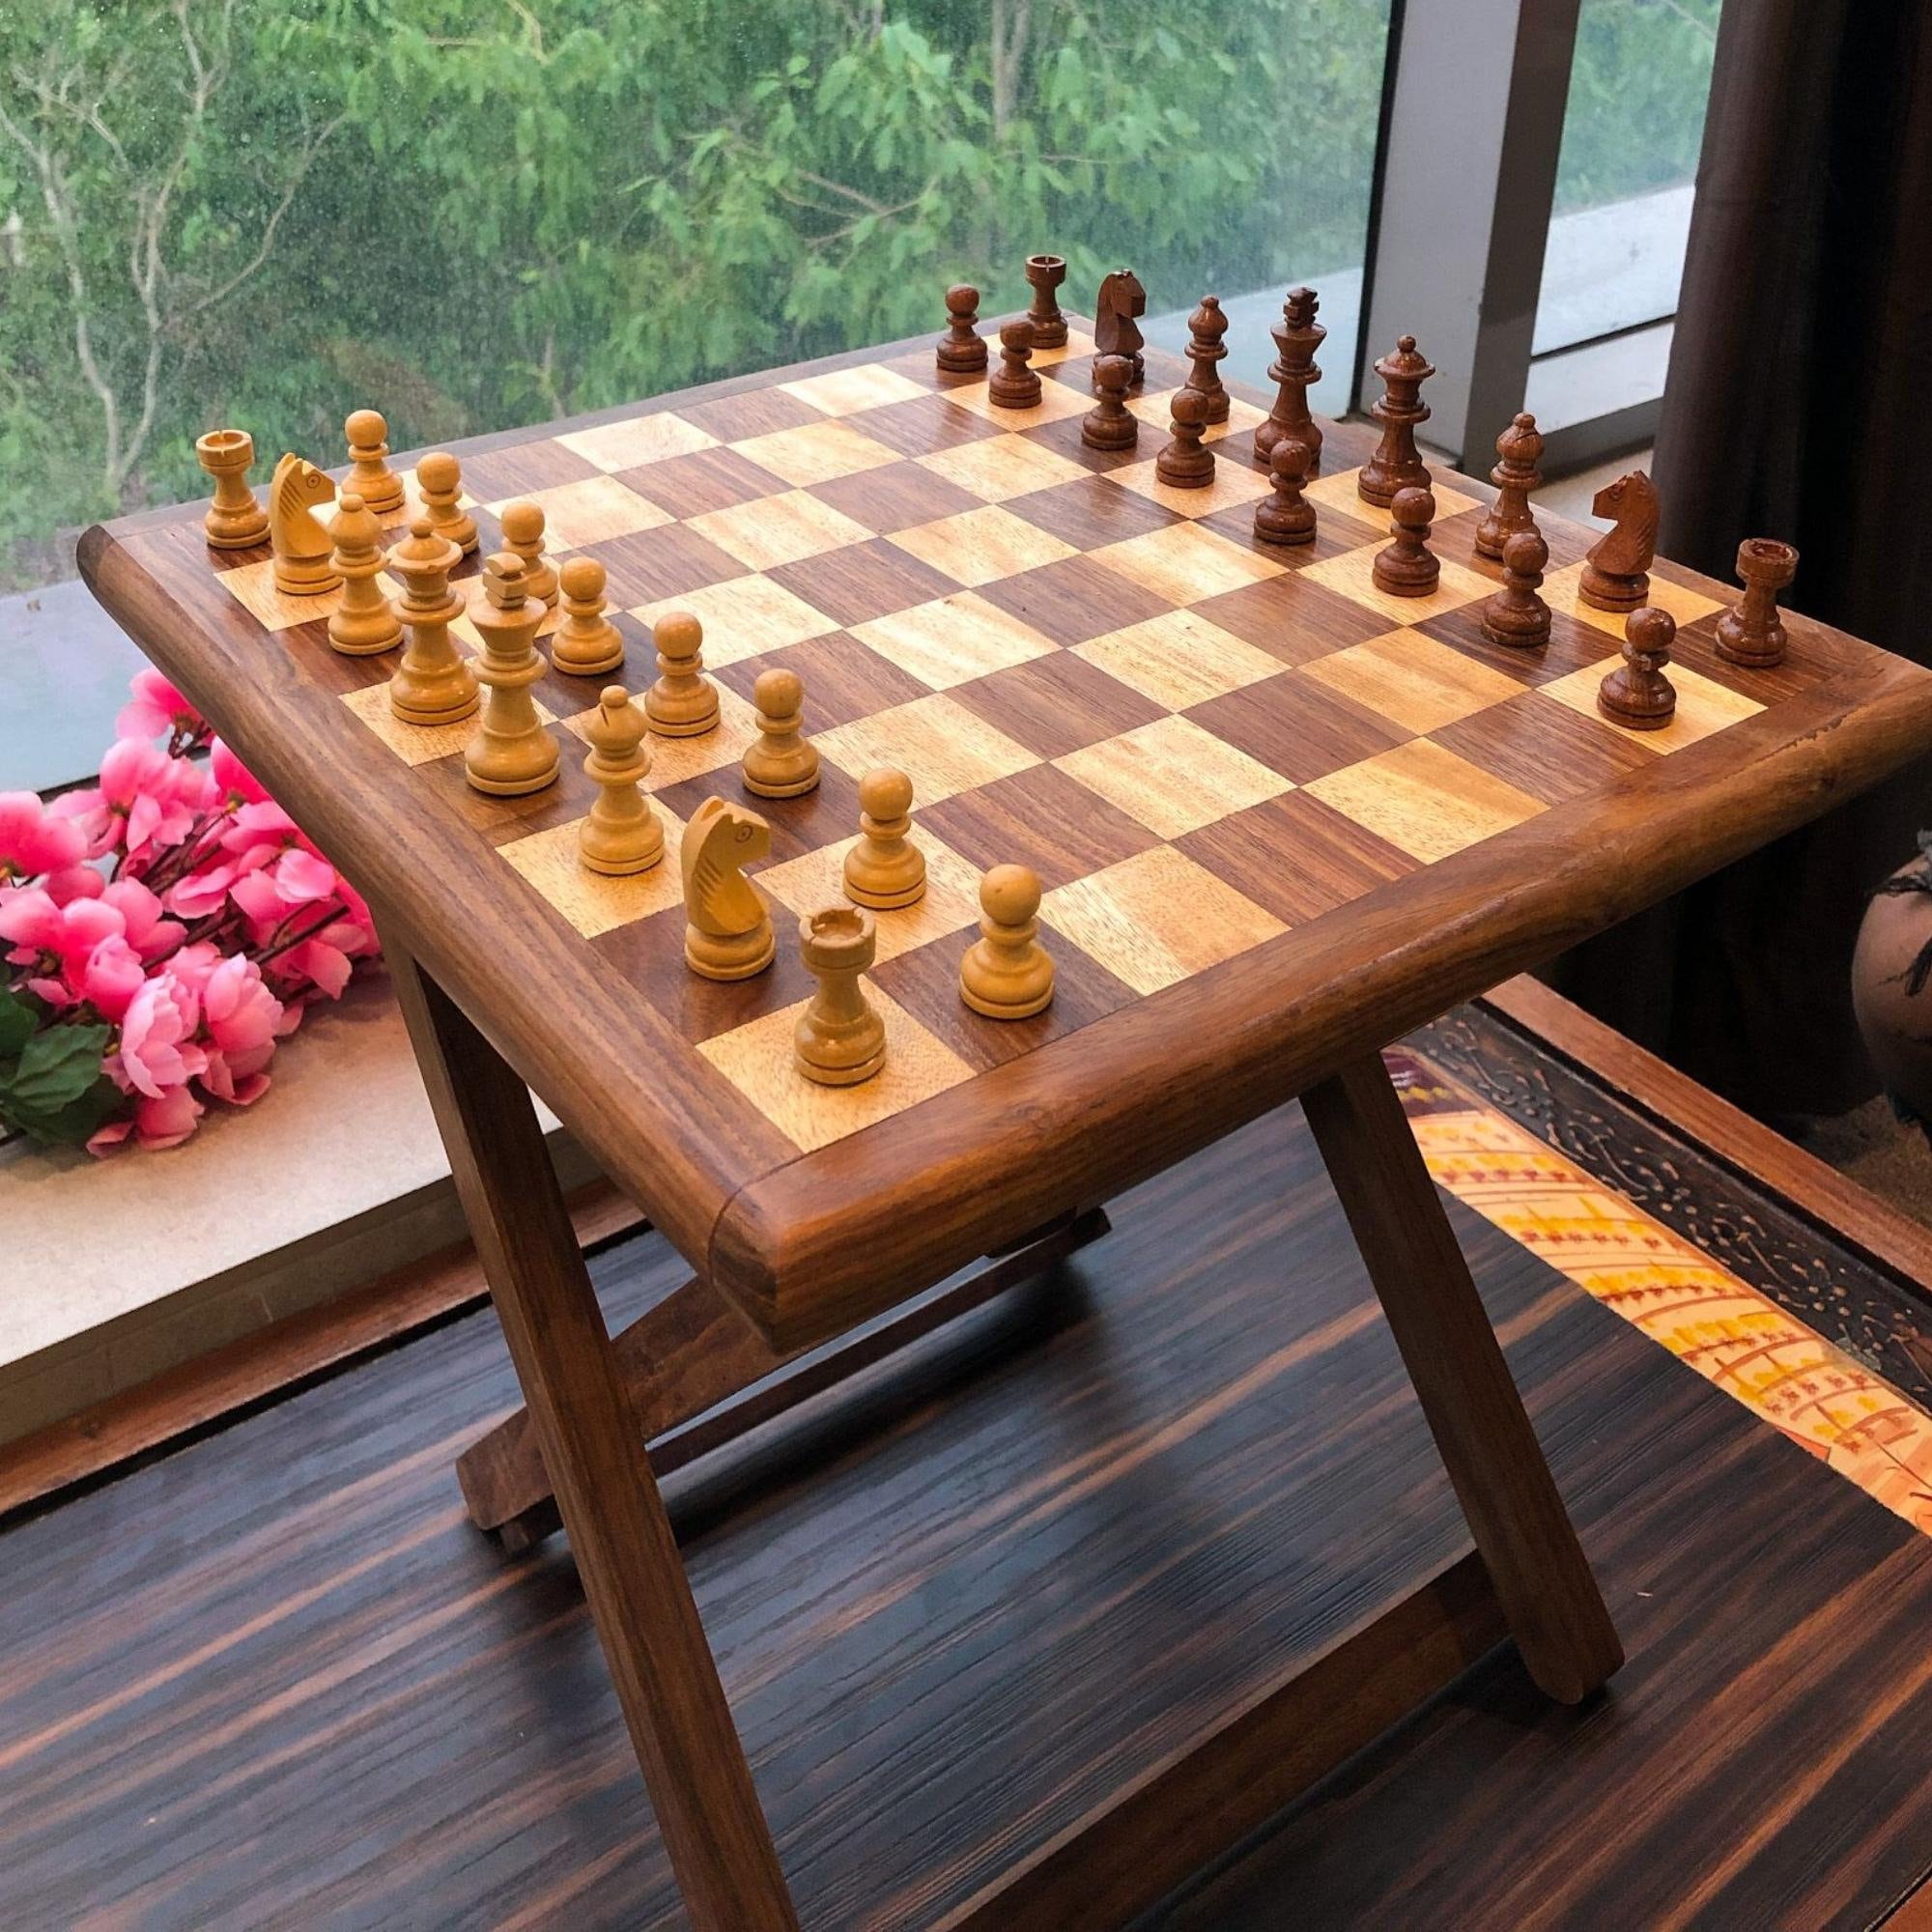 Chess Tables For Sale - Foter